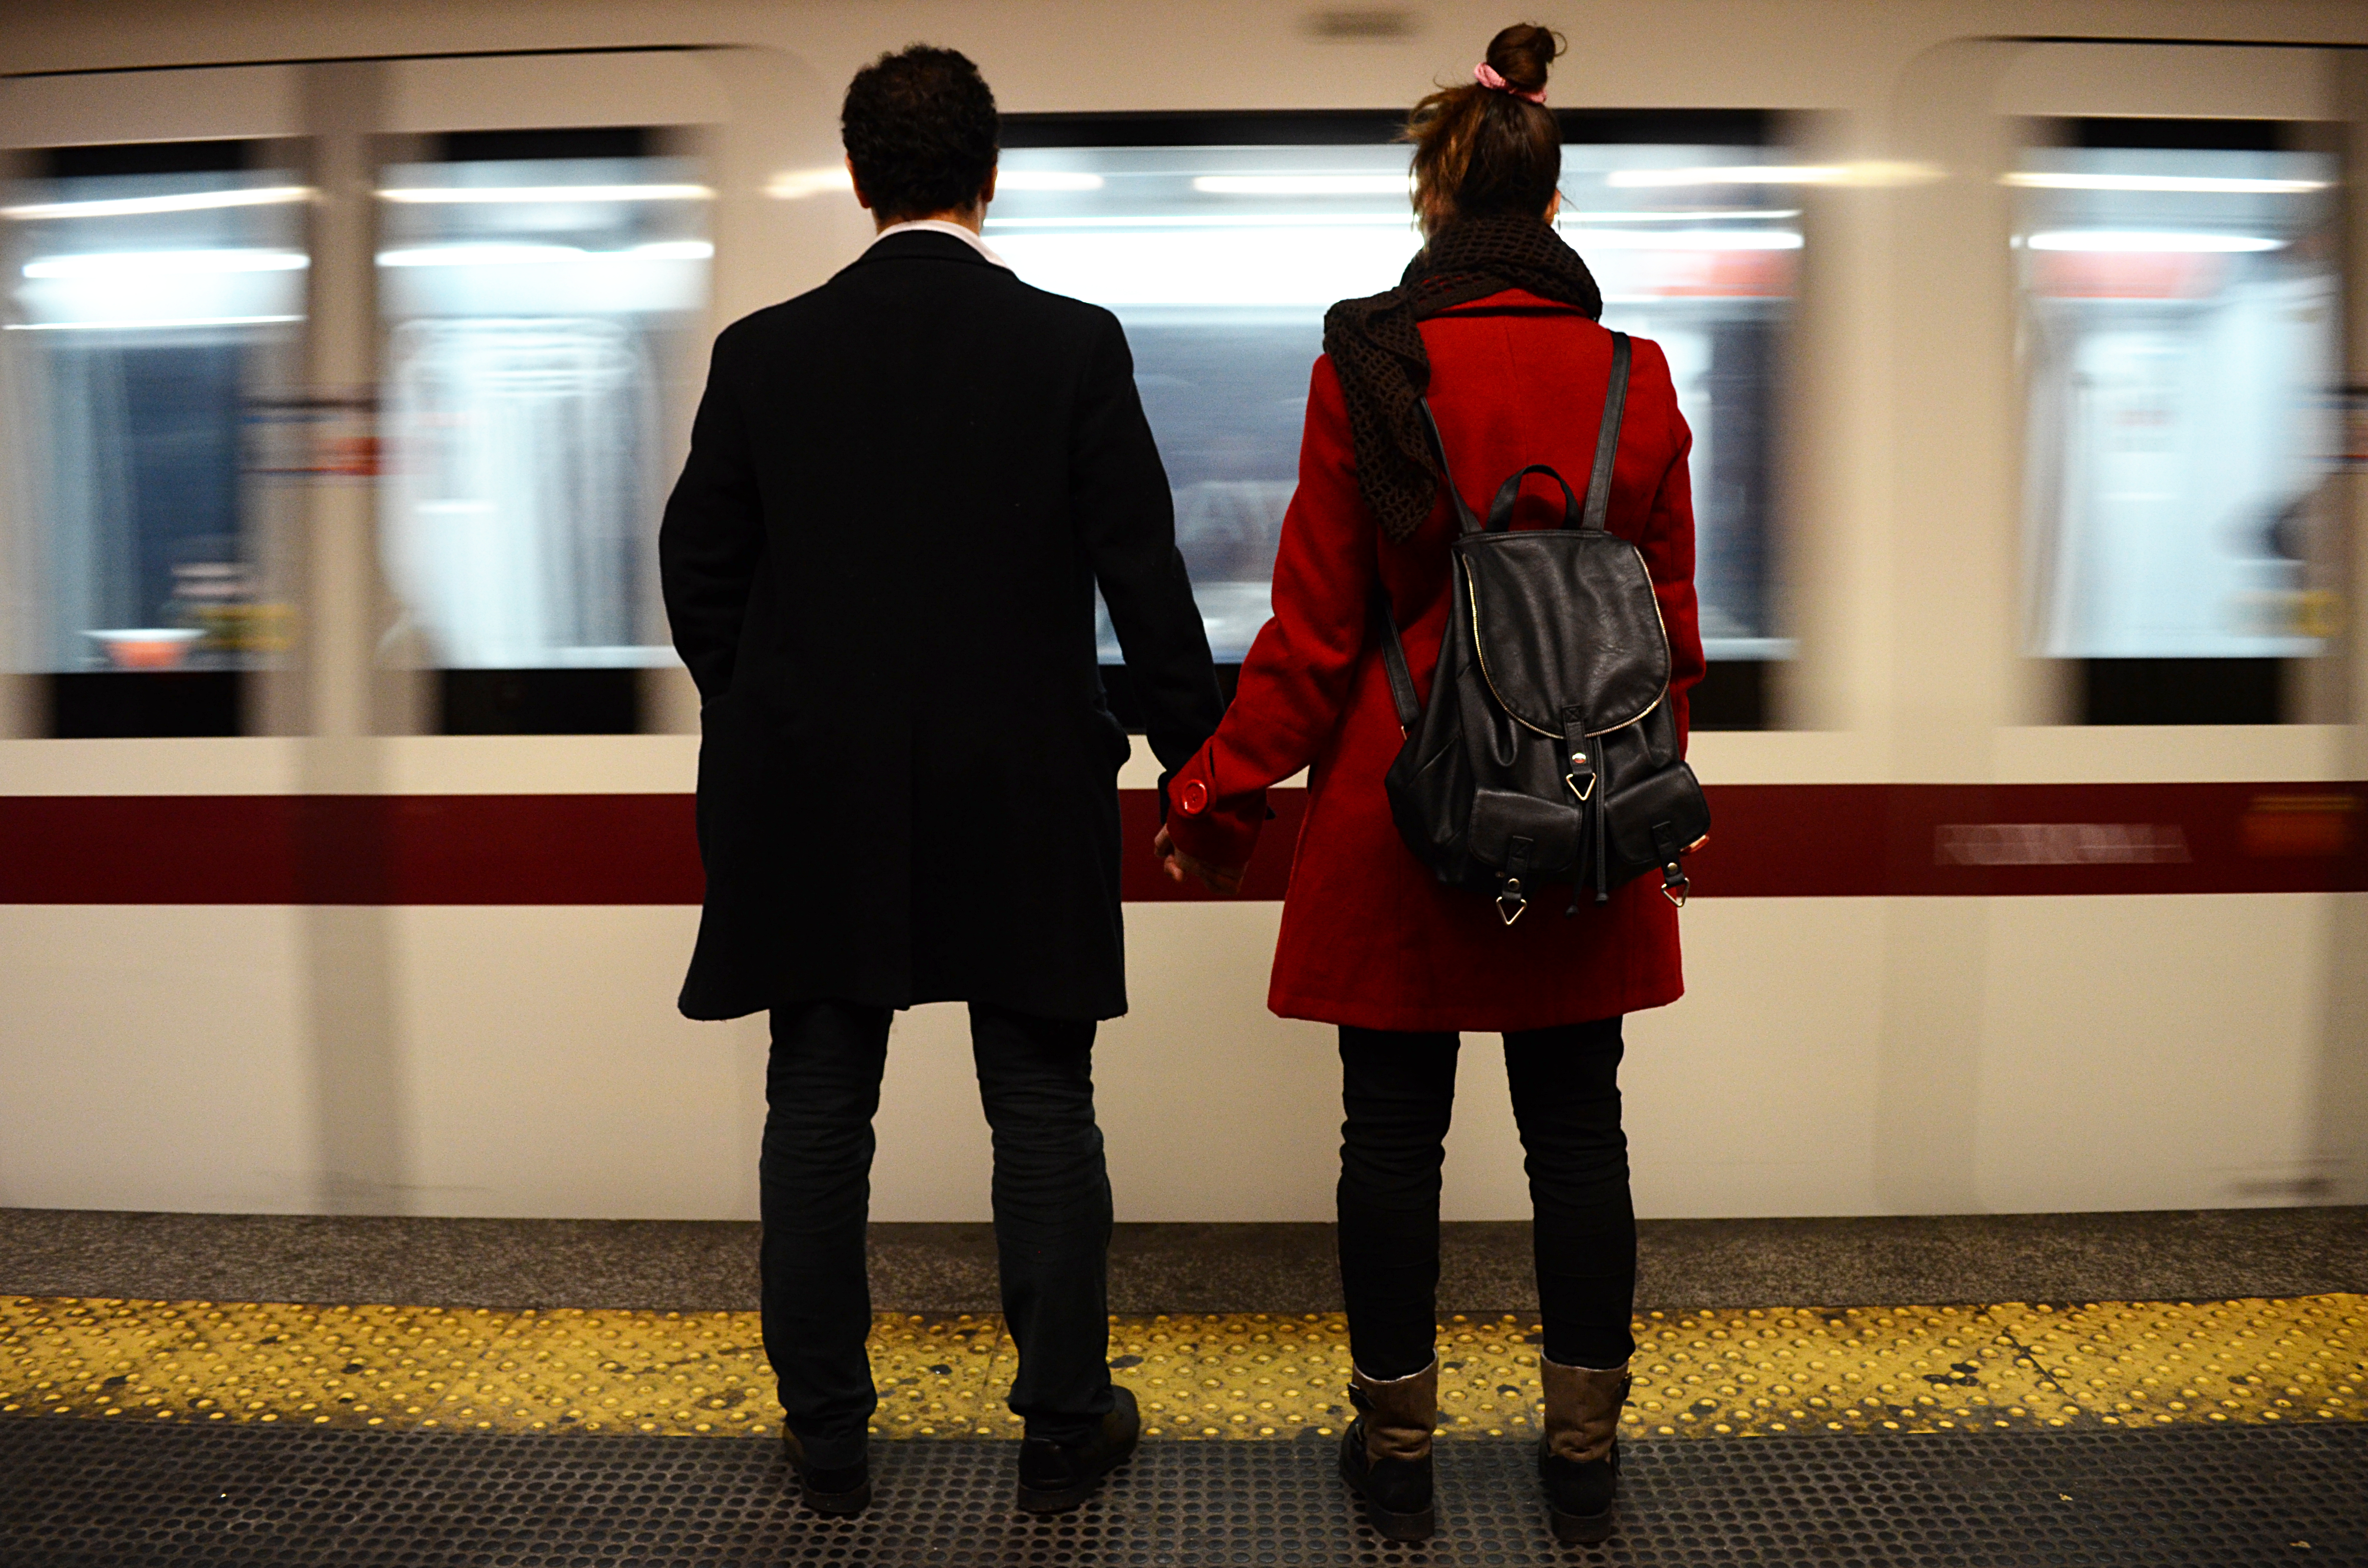 Wallpaper, people, red, train, Gentleman, fashion, couple, standing, Rome, waiting, station, girl, hand, fun, suit, tube, outerwear, flooring, formal wear 4928x3264